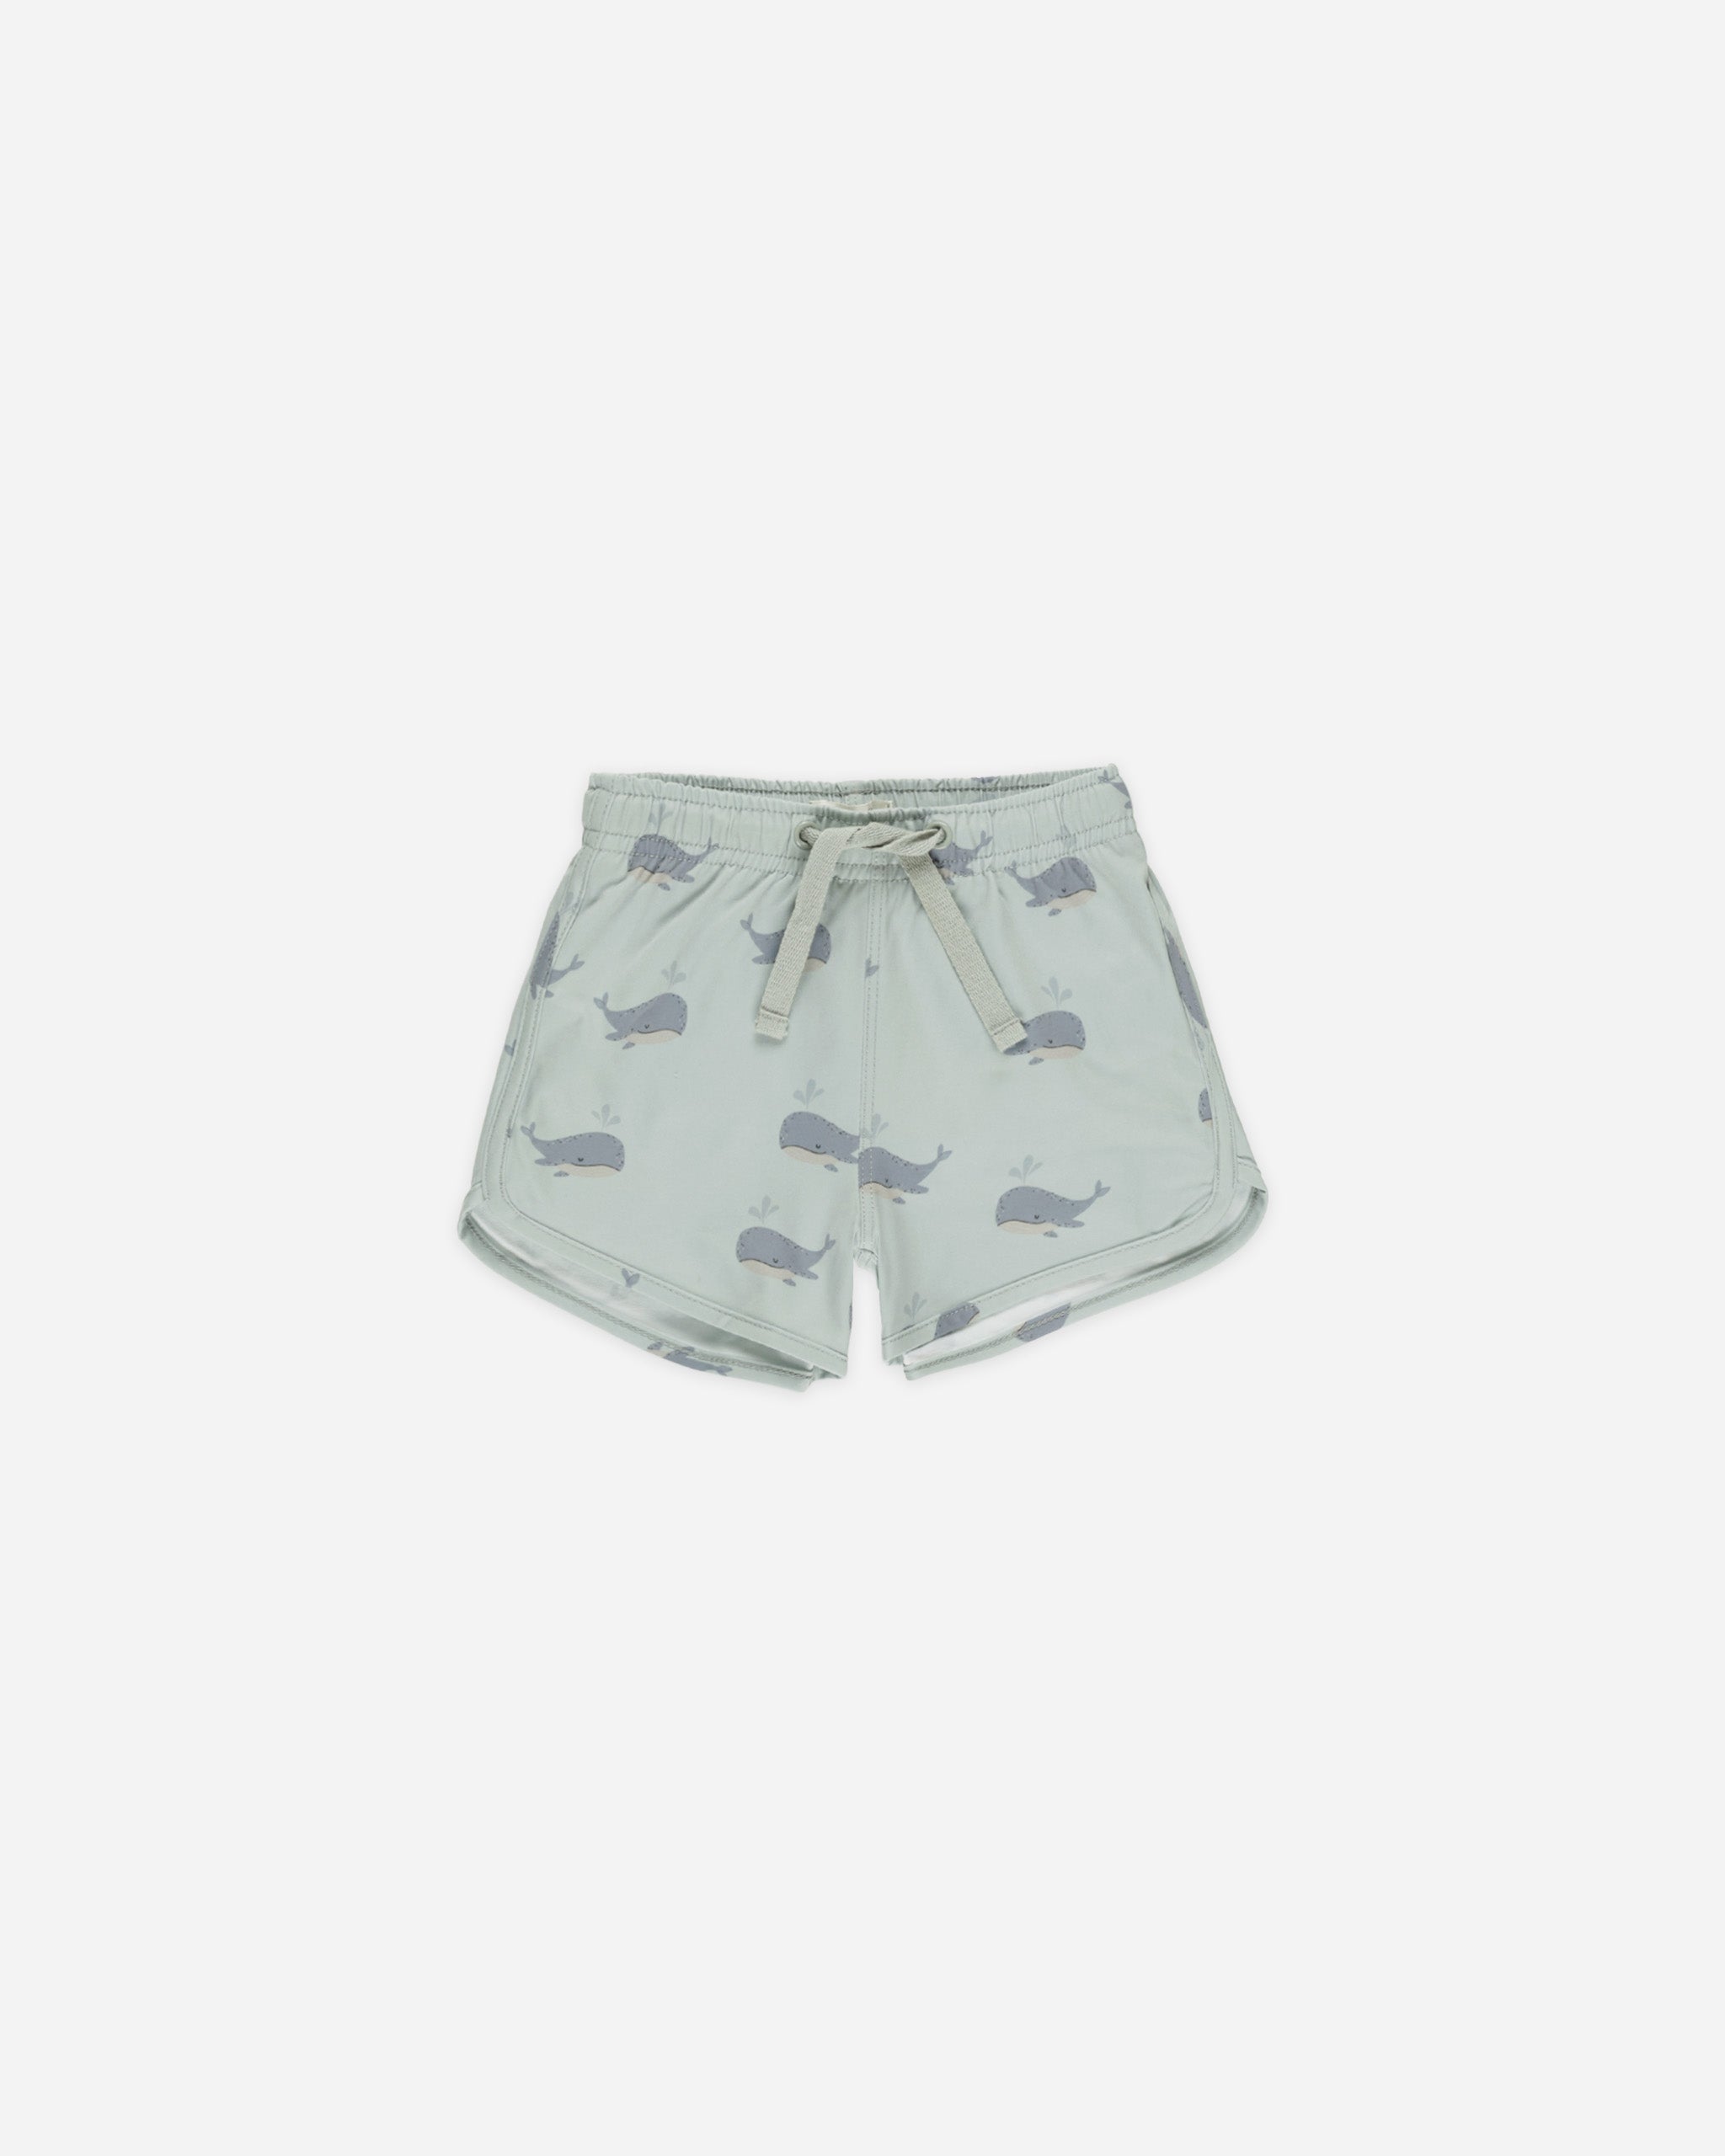 Swim Trunk || Whales - Rylee + Cru | Kids Clothes | Trendy Baby Clothes | Modern Infant Outfits |